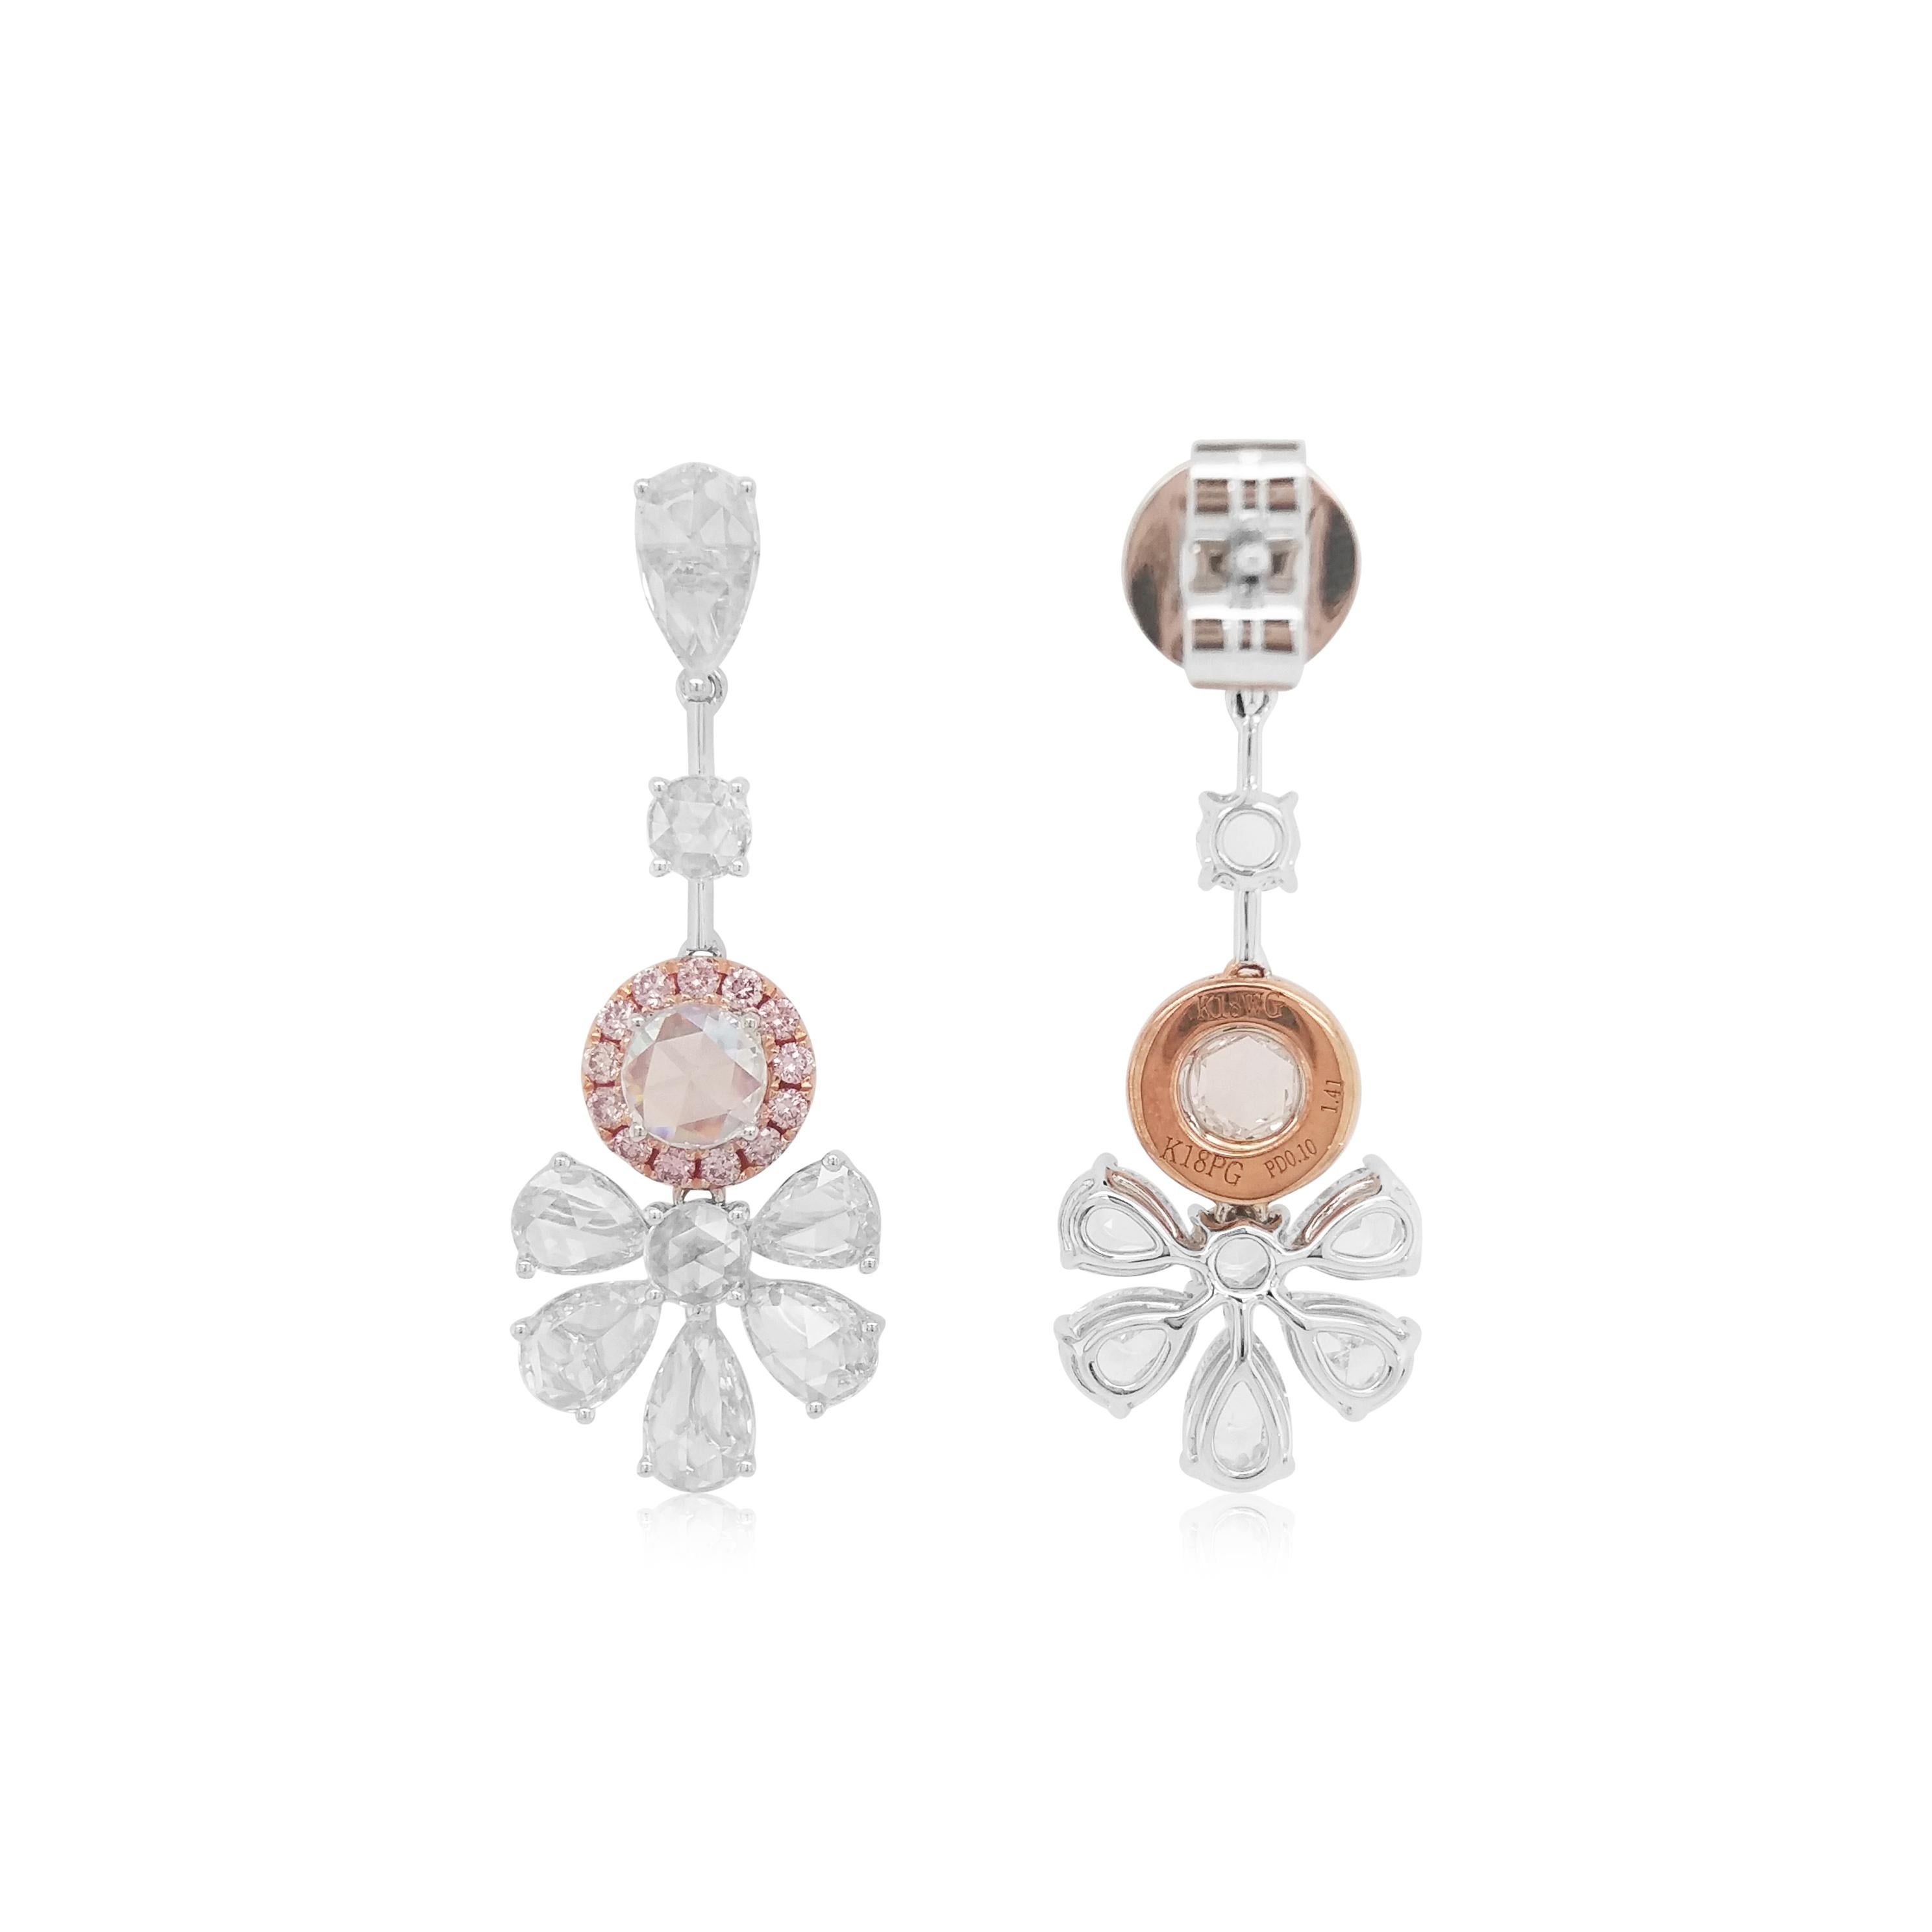 These alluring earrings feature spectacular pear and round shape rose cut white diamonds and a halo of scintillating arrangement of Argyle pink diamonds. Perfectly showcasing the mesmeric beauty of rose cut white diamonds, these one-of-a-kind